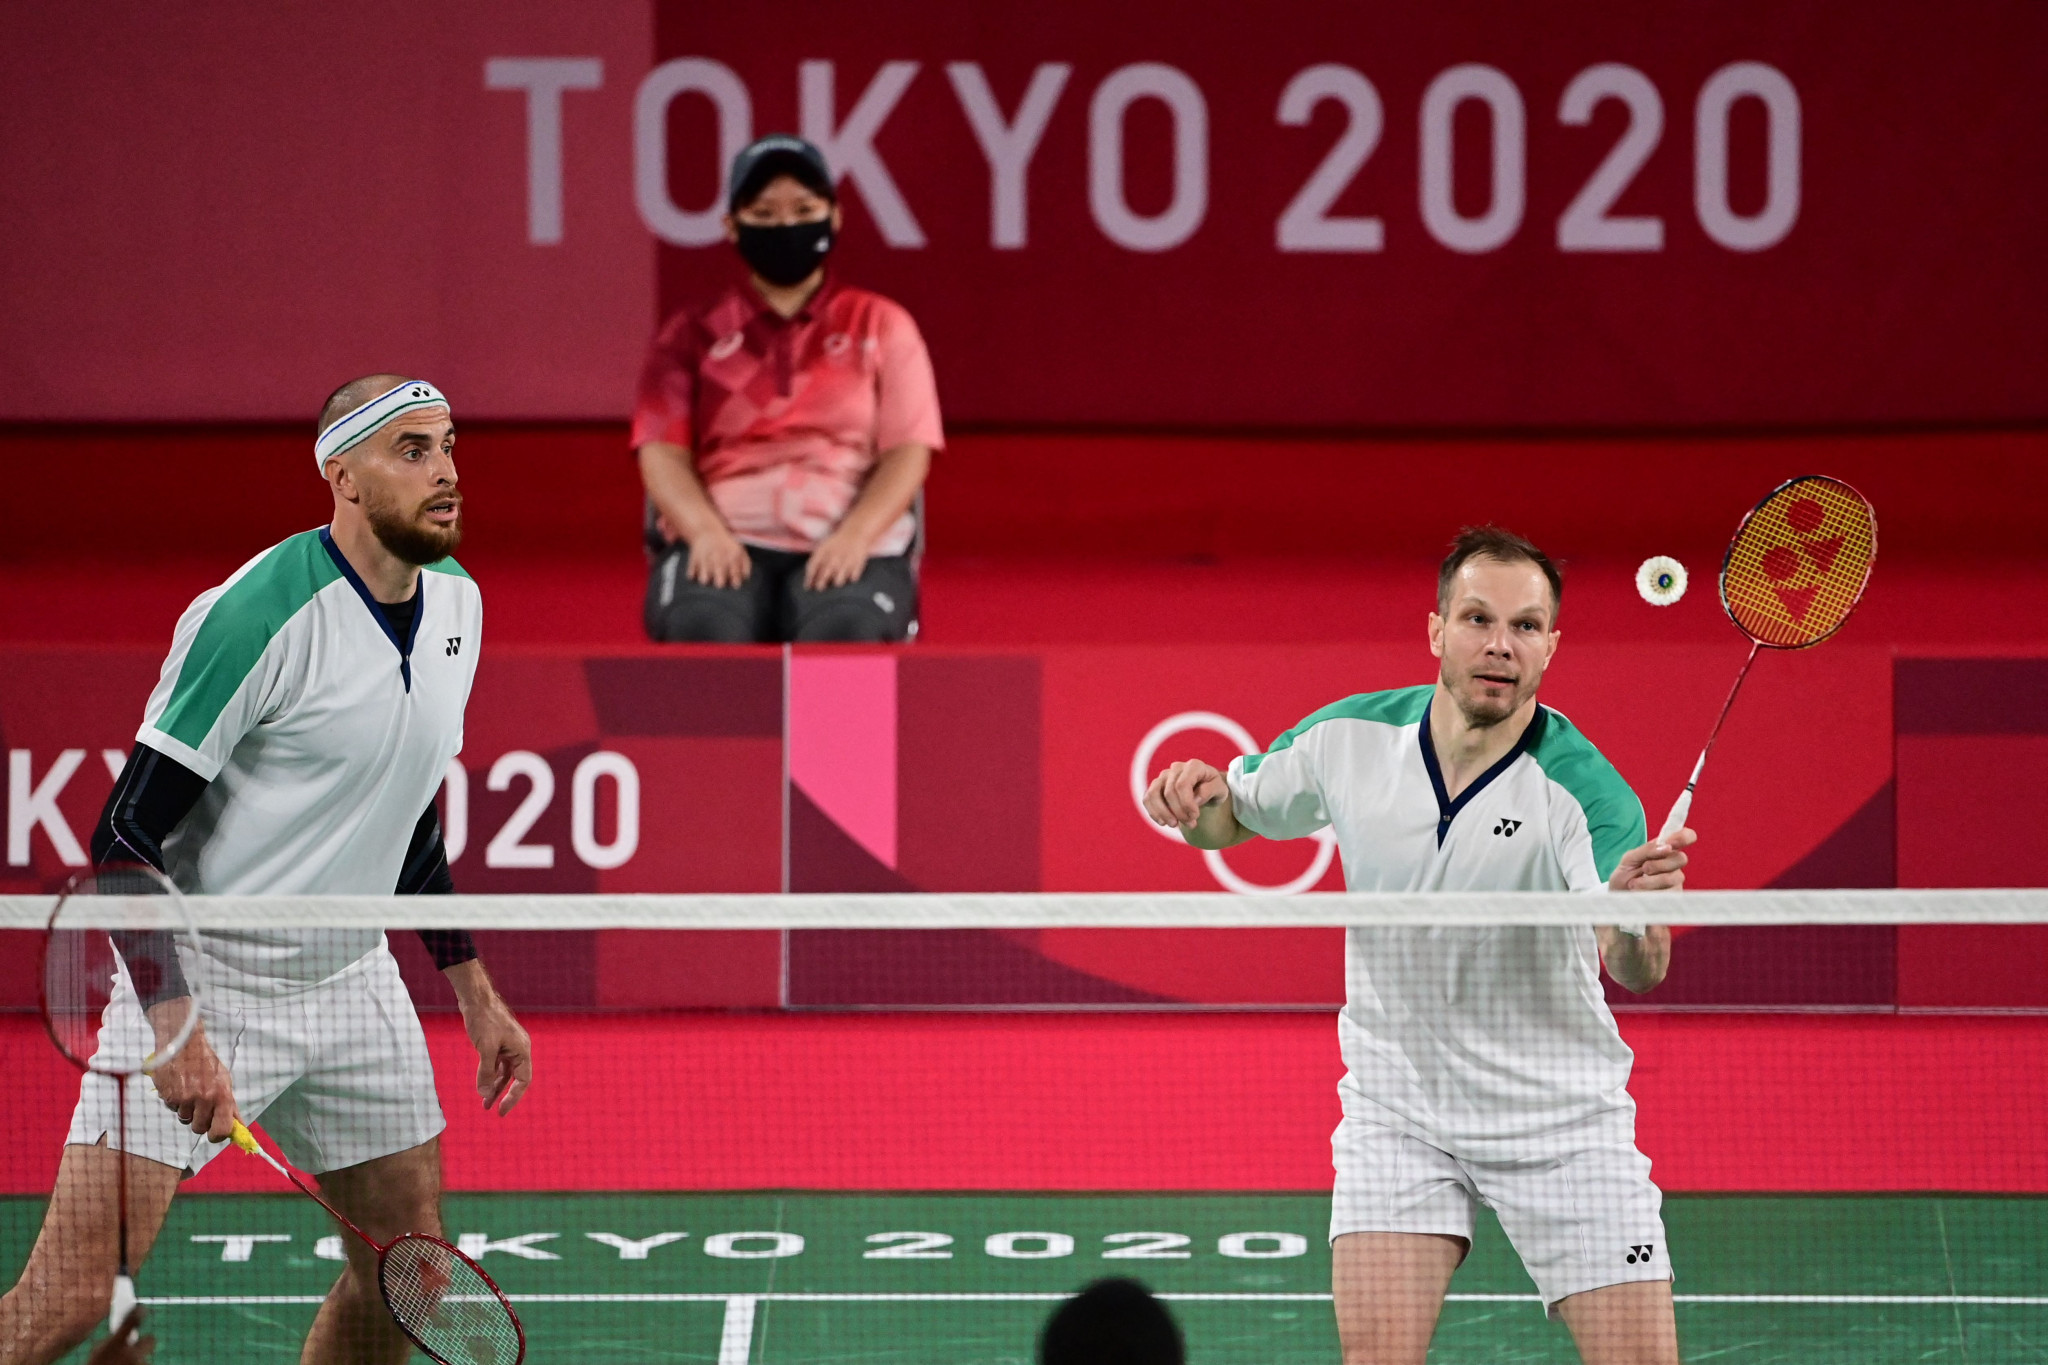 The BWF is planning to create a "regulative and operational framework" that will allow Russian and Belarusian athletes to compete as neutrals ©Getty Images